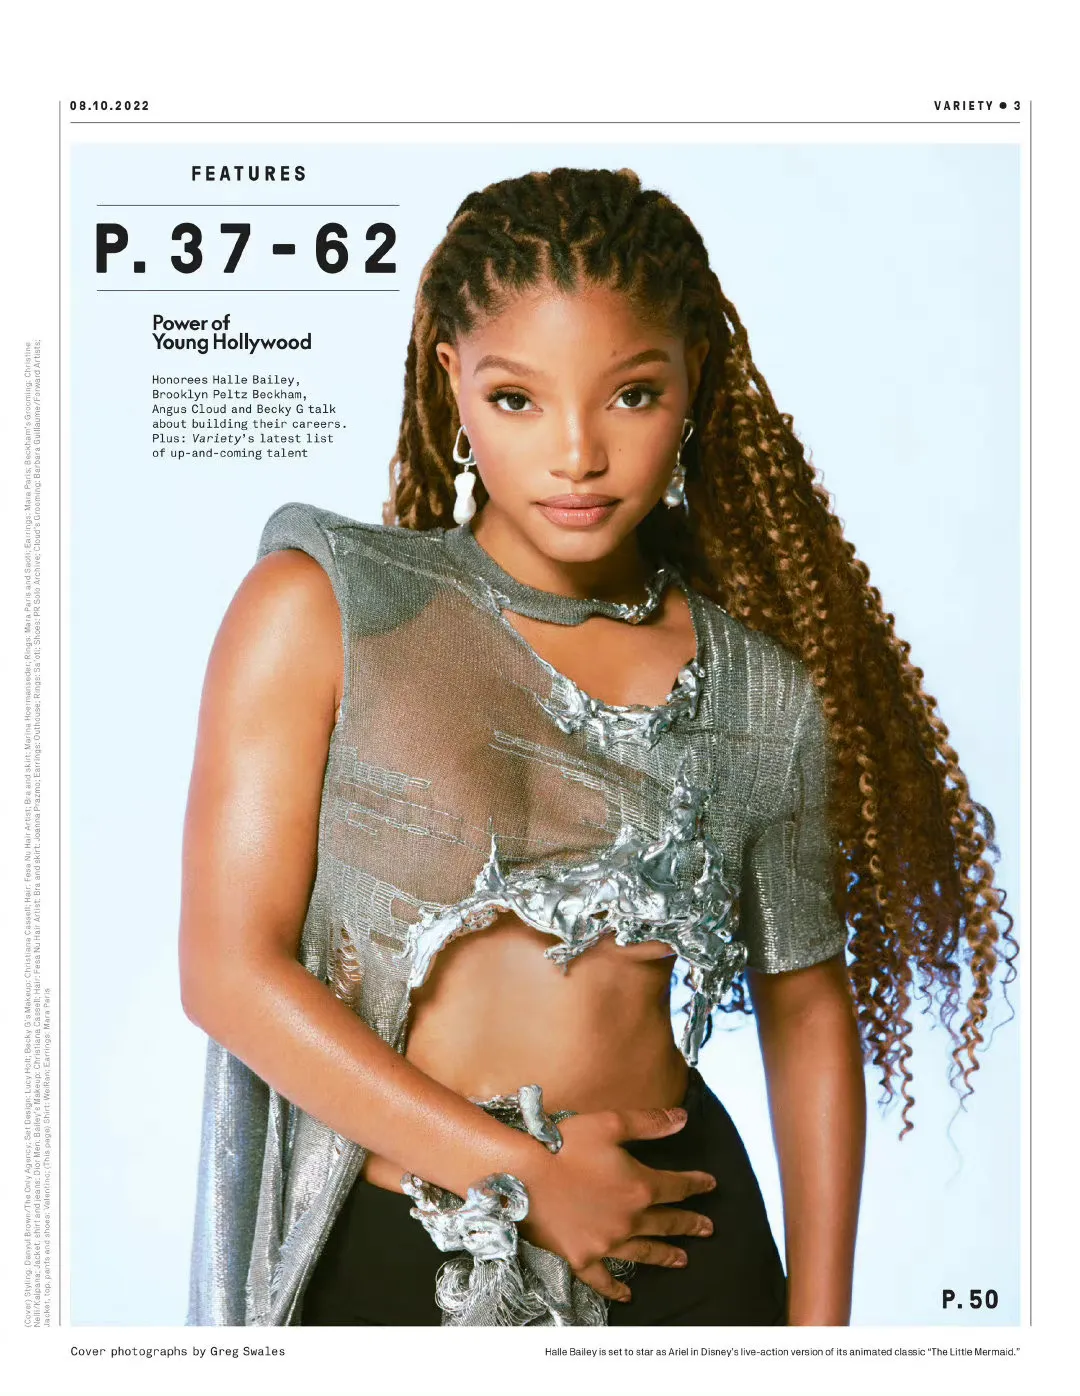 Halle Bailey, new photo for 'Variety' magazine "Power of Young Hollywood" special issue | FMV6